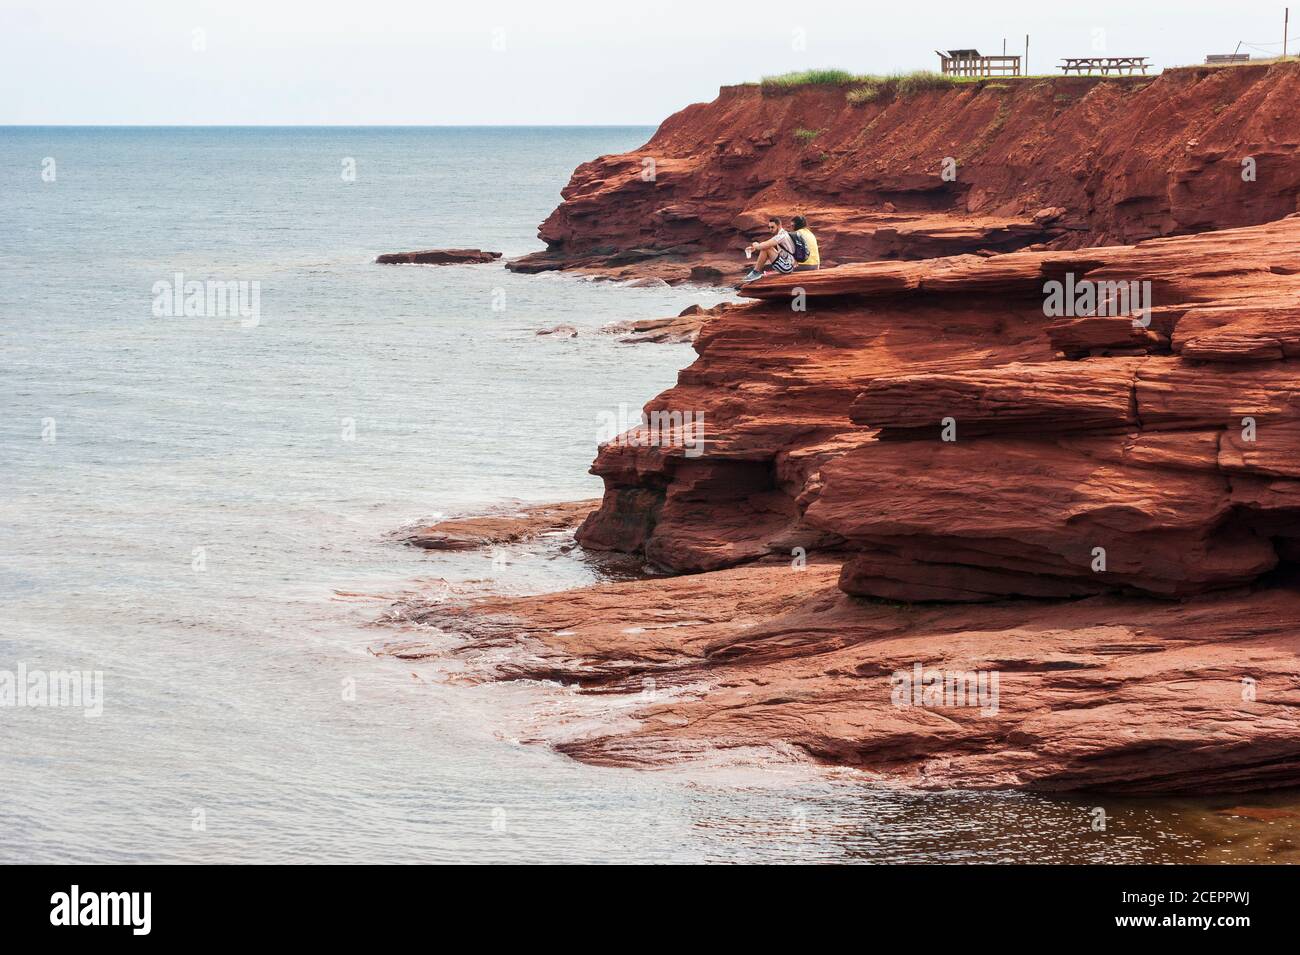 Couple enjoying the scenery from a lookout point. Red sandstone promontory on the Gulf of Saint Lawrence. Oceanview Lookoff, PEI National Park, Canada Stock Photo